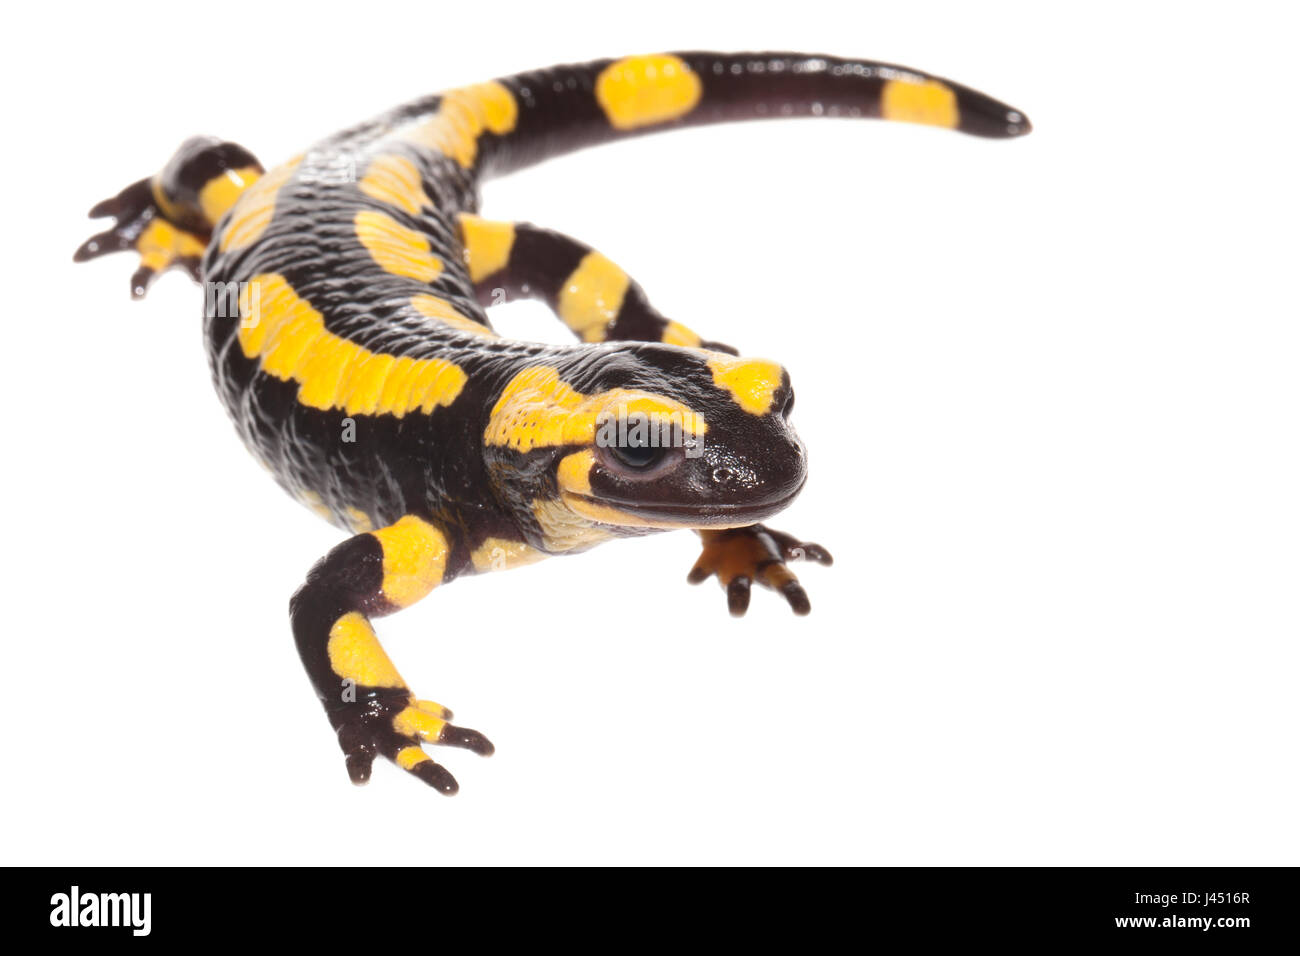 Fire salamander photographed on a white background Stock Photo